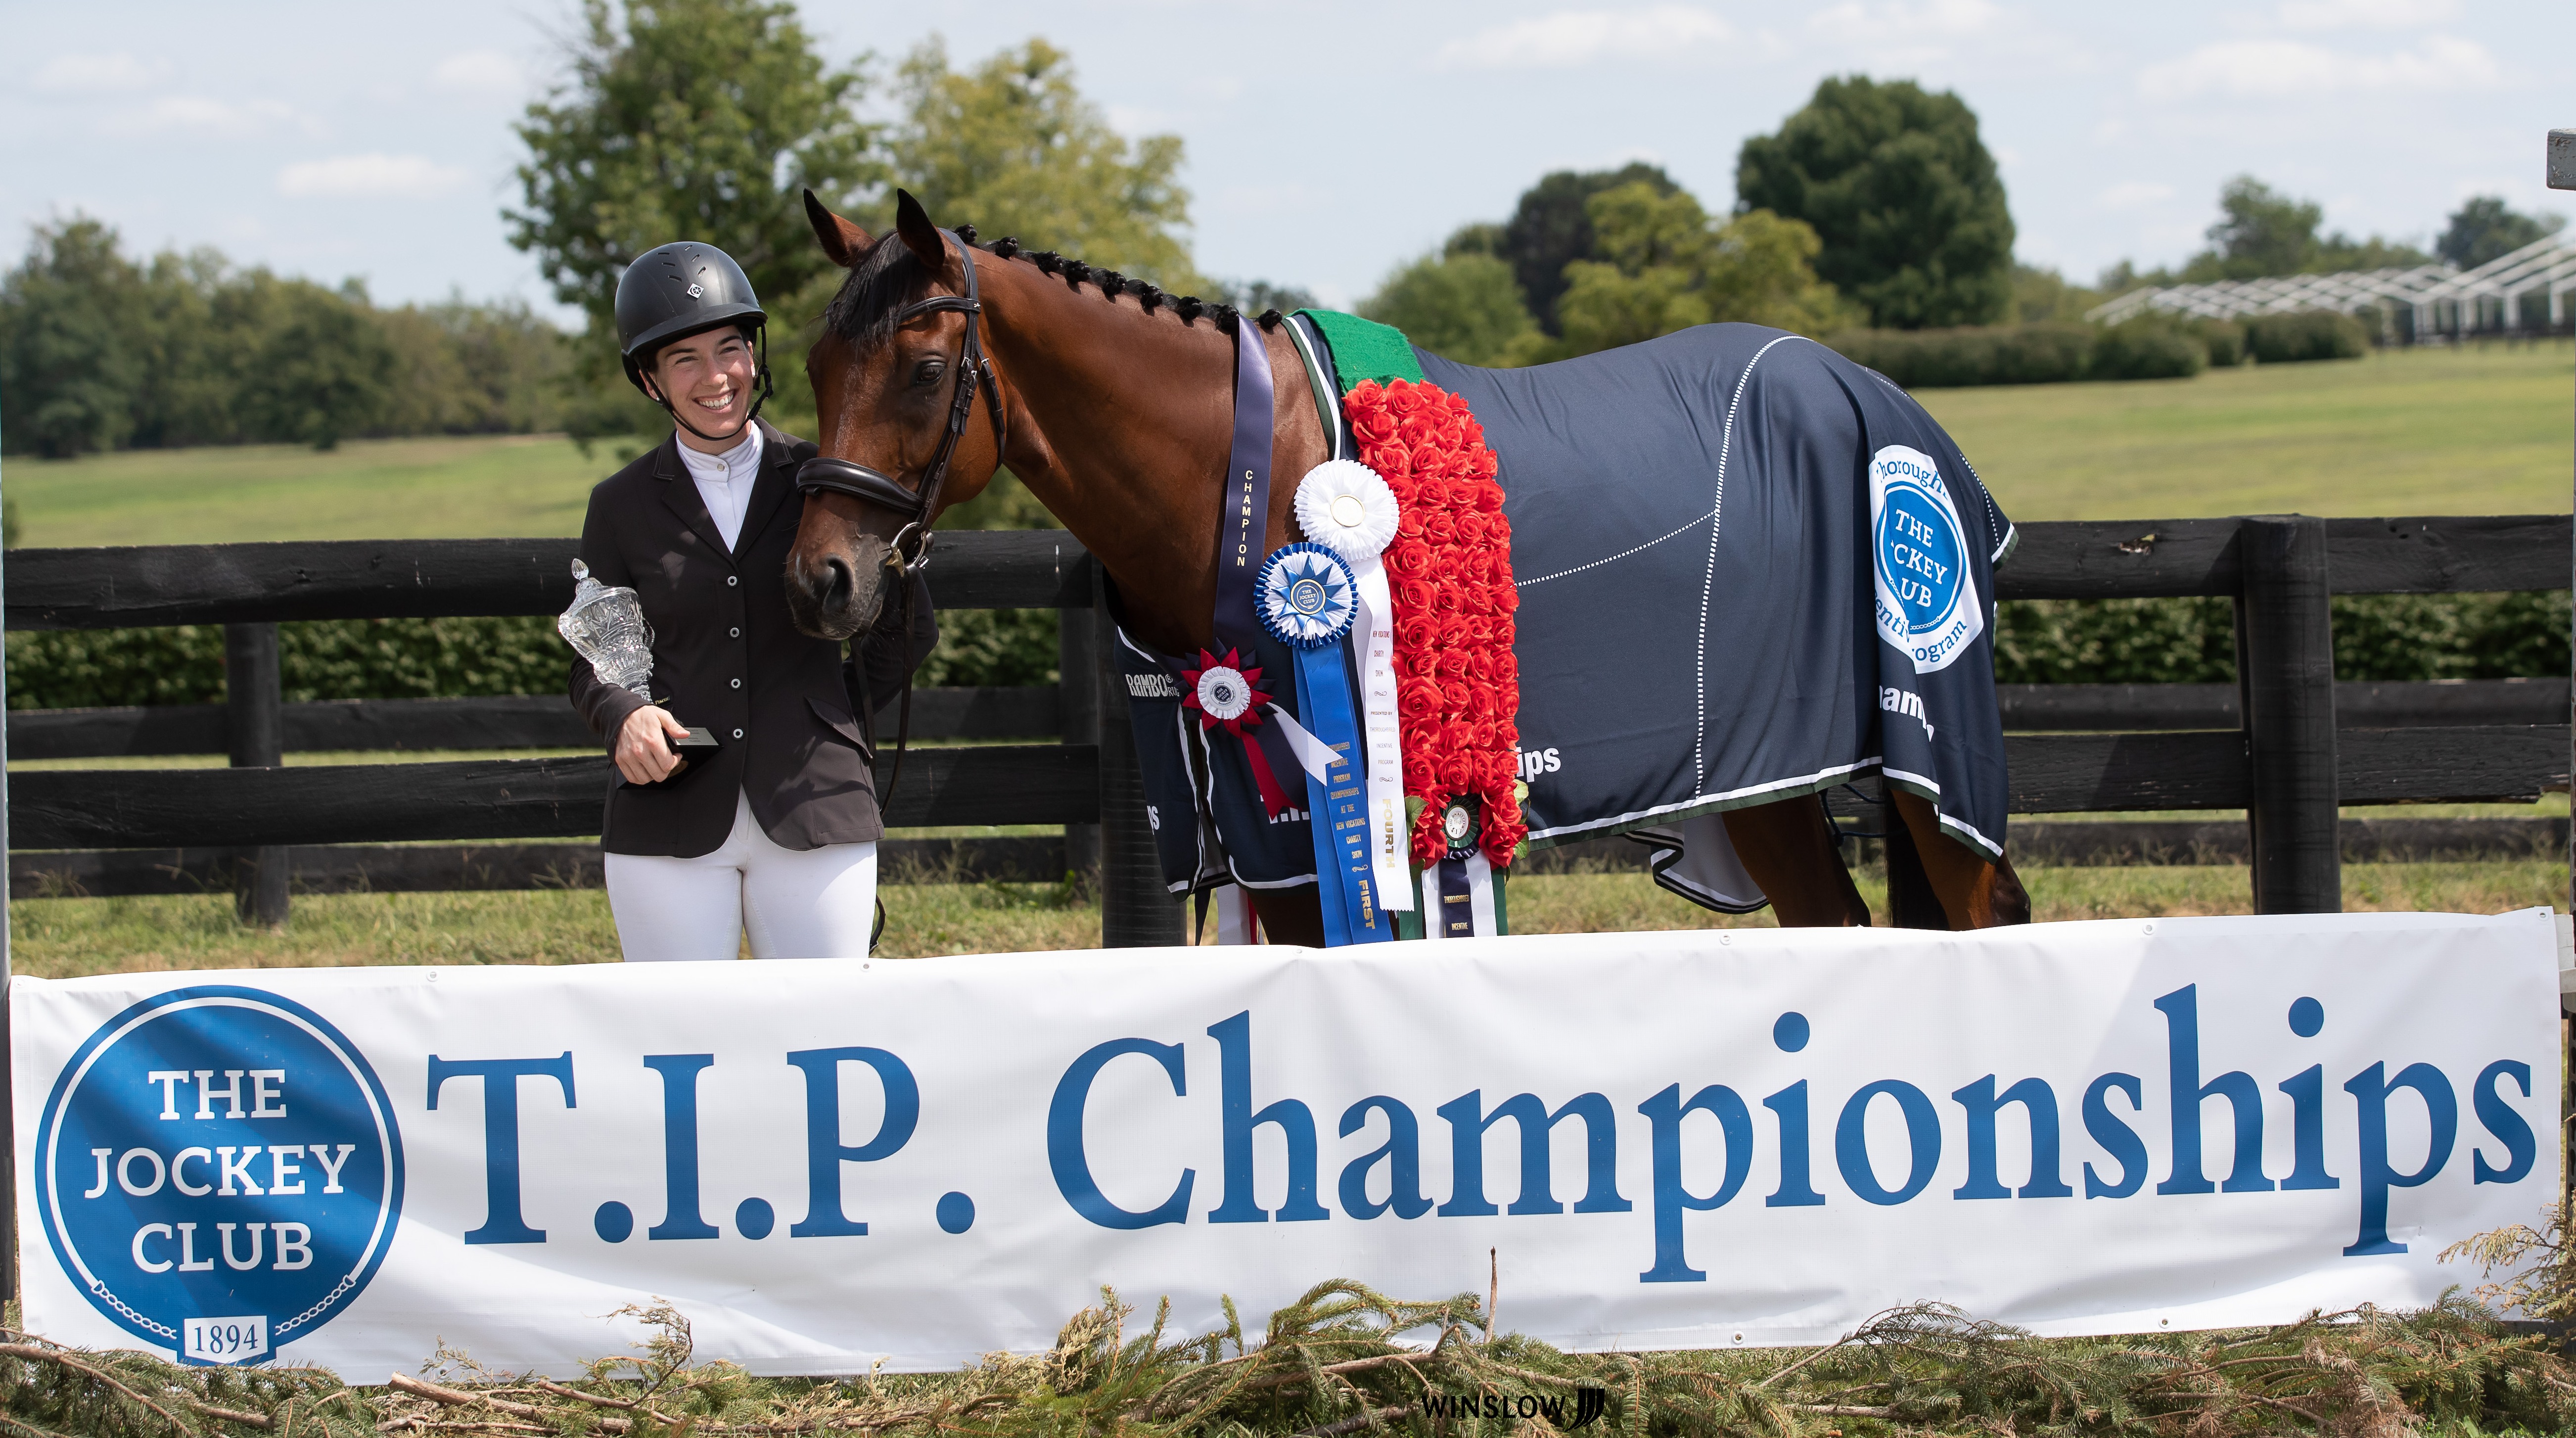 Bethany Siehr winning the Thoroughbred Incentive Program National Championship | Equine Program Manager Wins Championship Title at National Thoroughbred Show